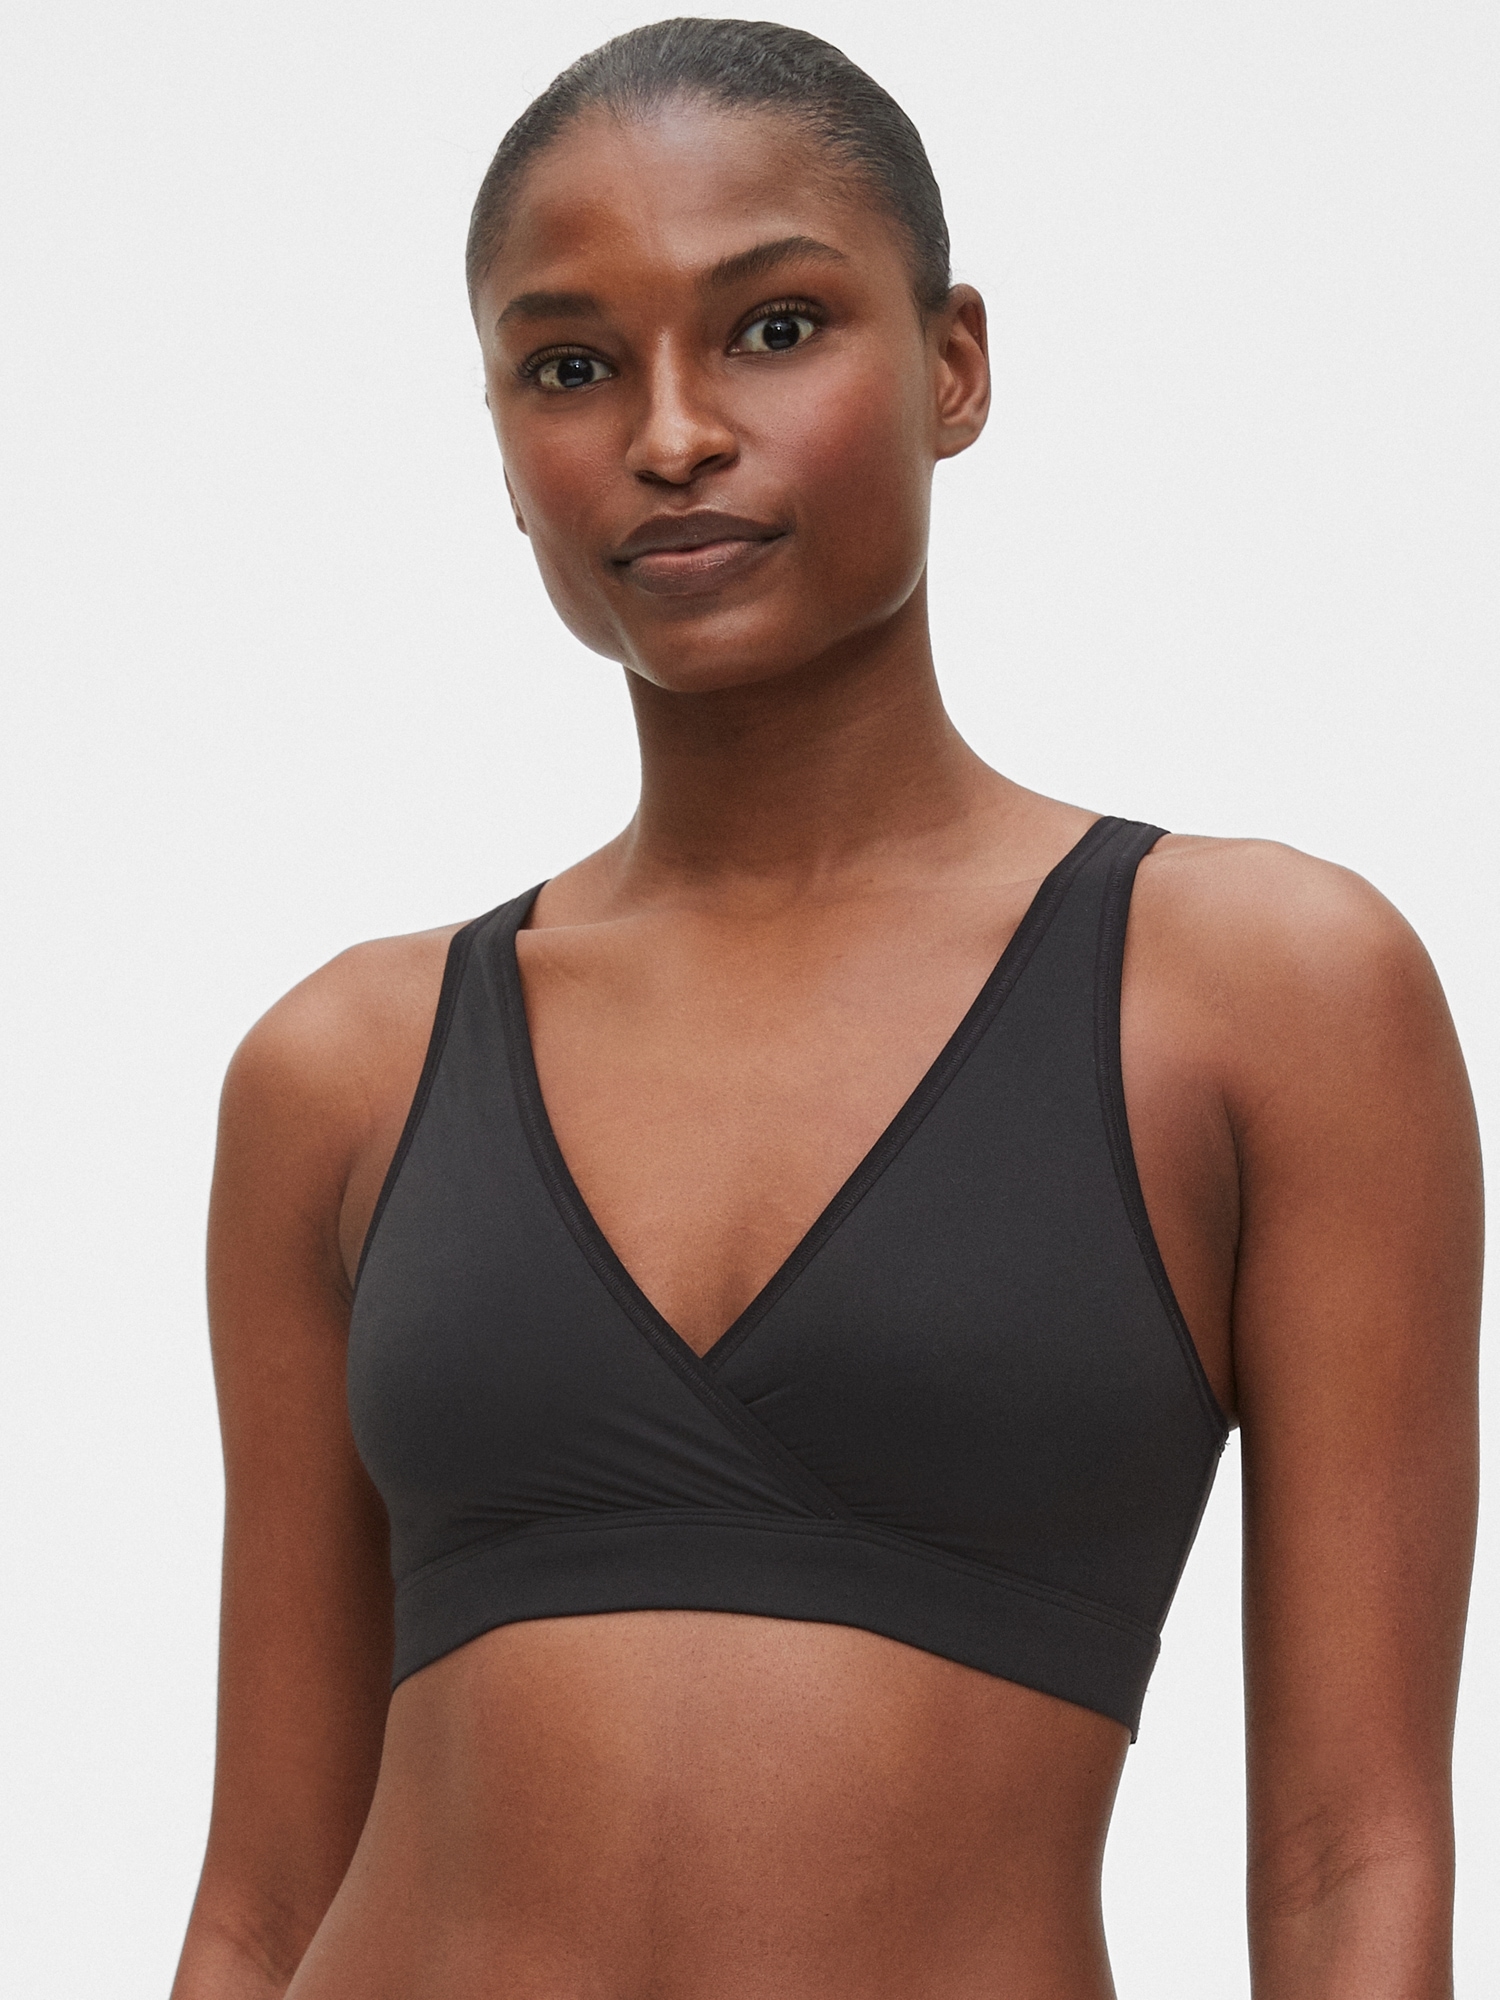 Simple Wishes: Do I need a nursing bra? Hide the nursing clasp in